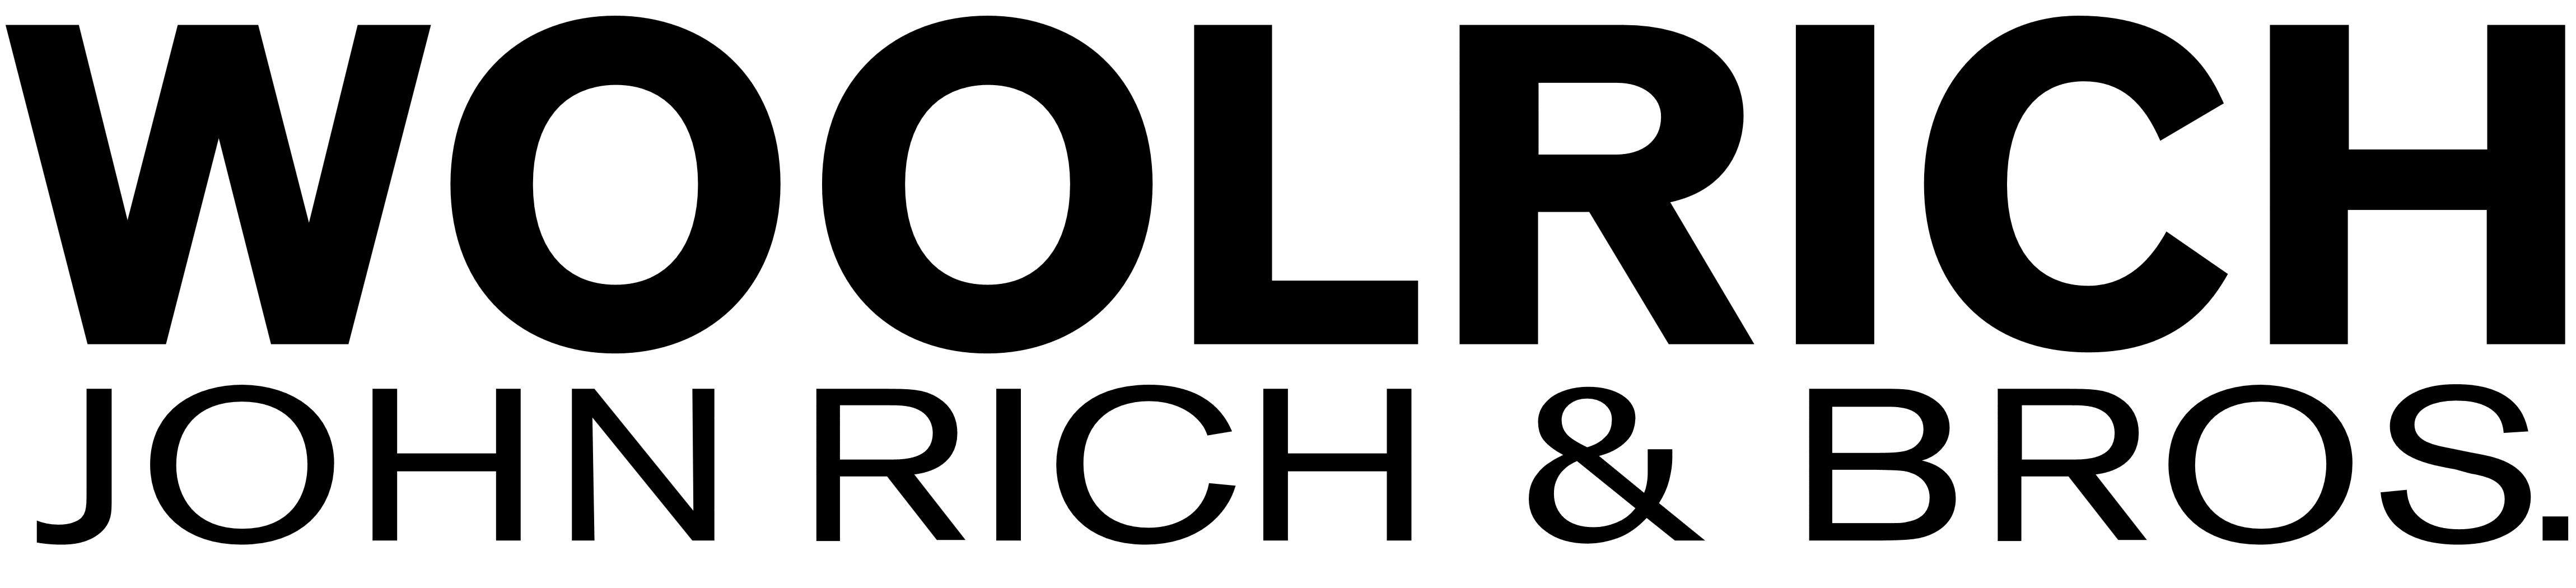 Woolrich Logo - Woolrich and clothes